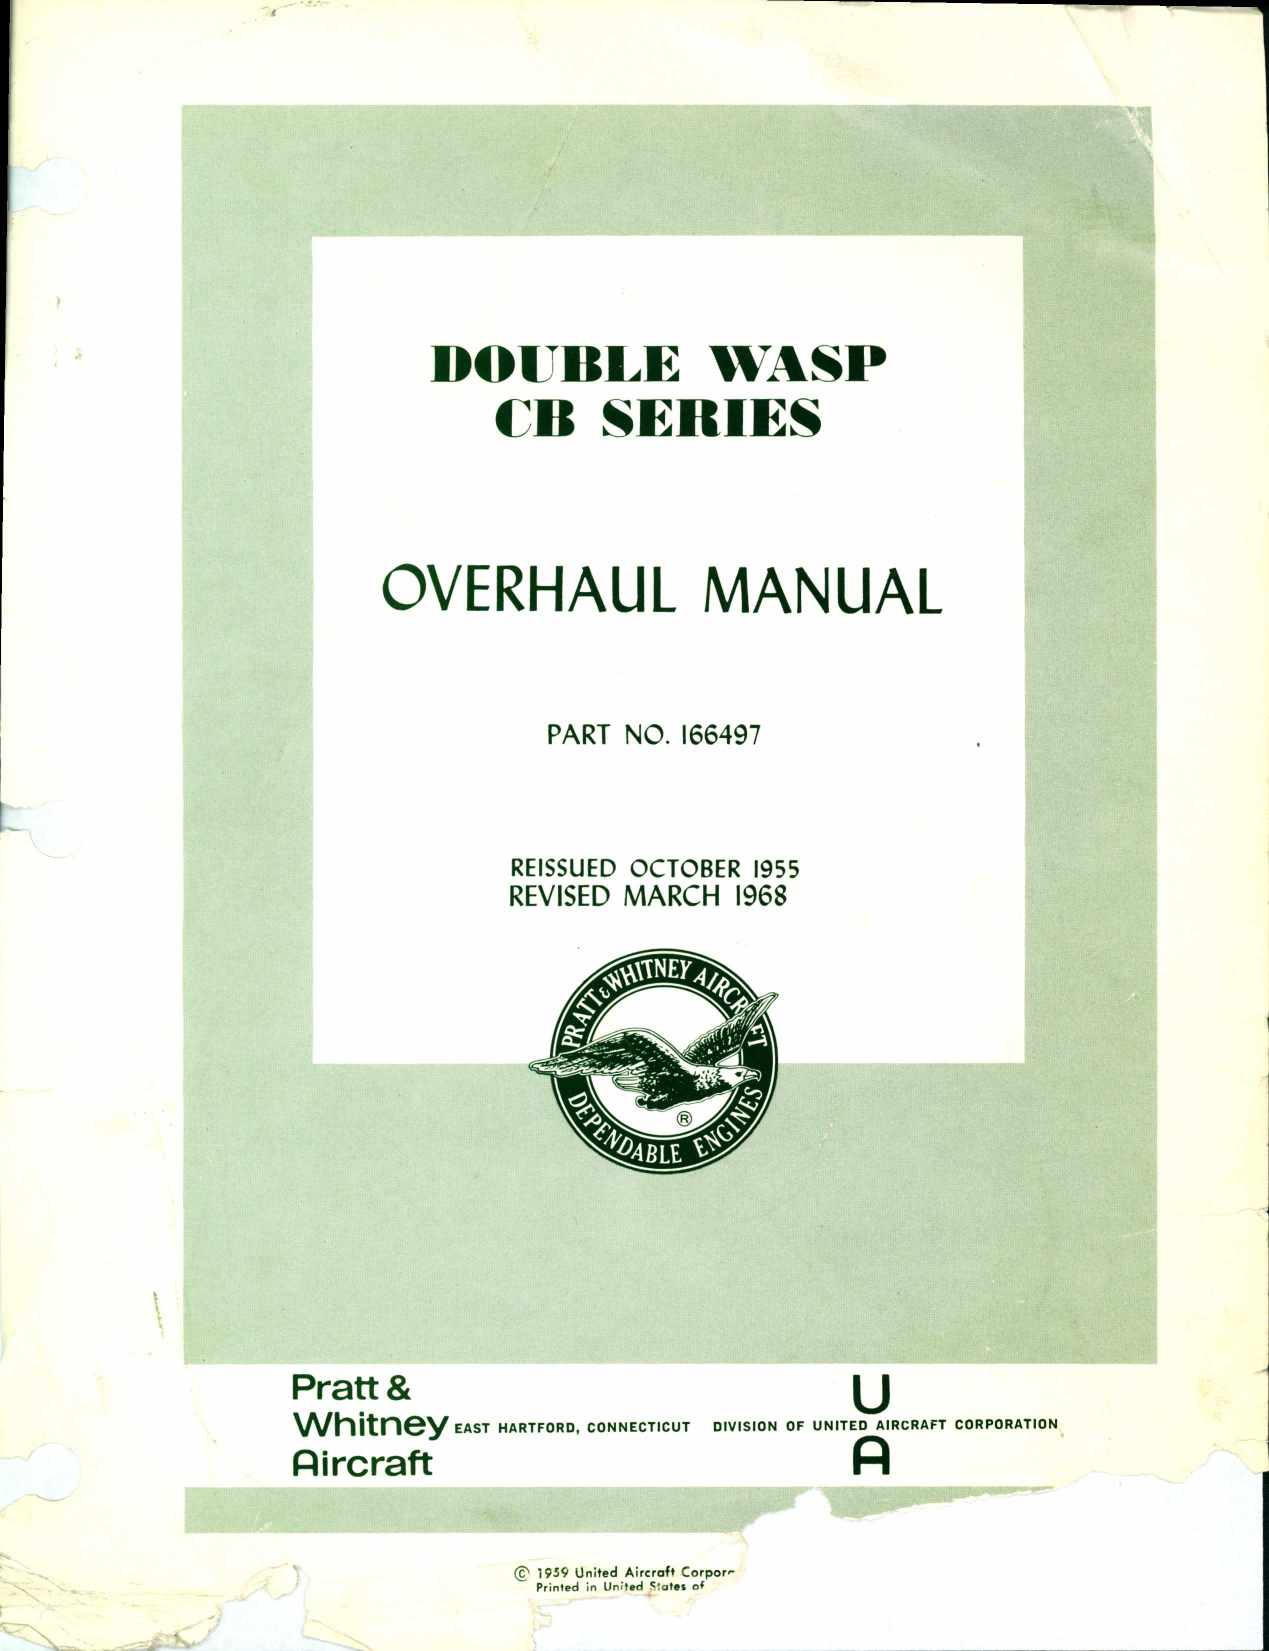 Sample page 1 from AirCorps Library document: Overhaul Manual for Double Wasp CB Series